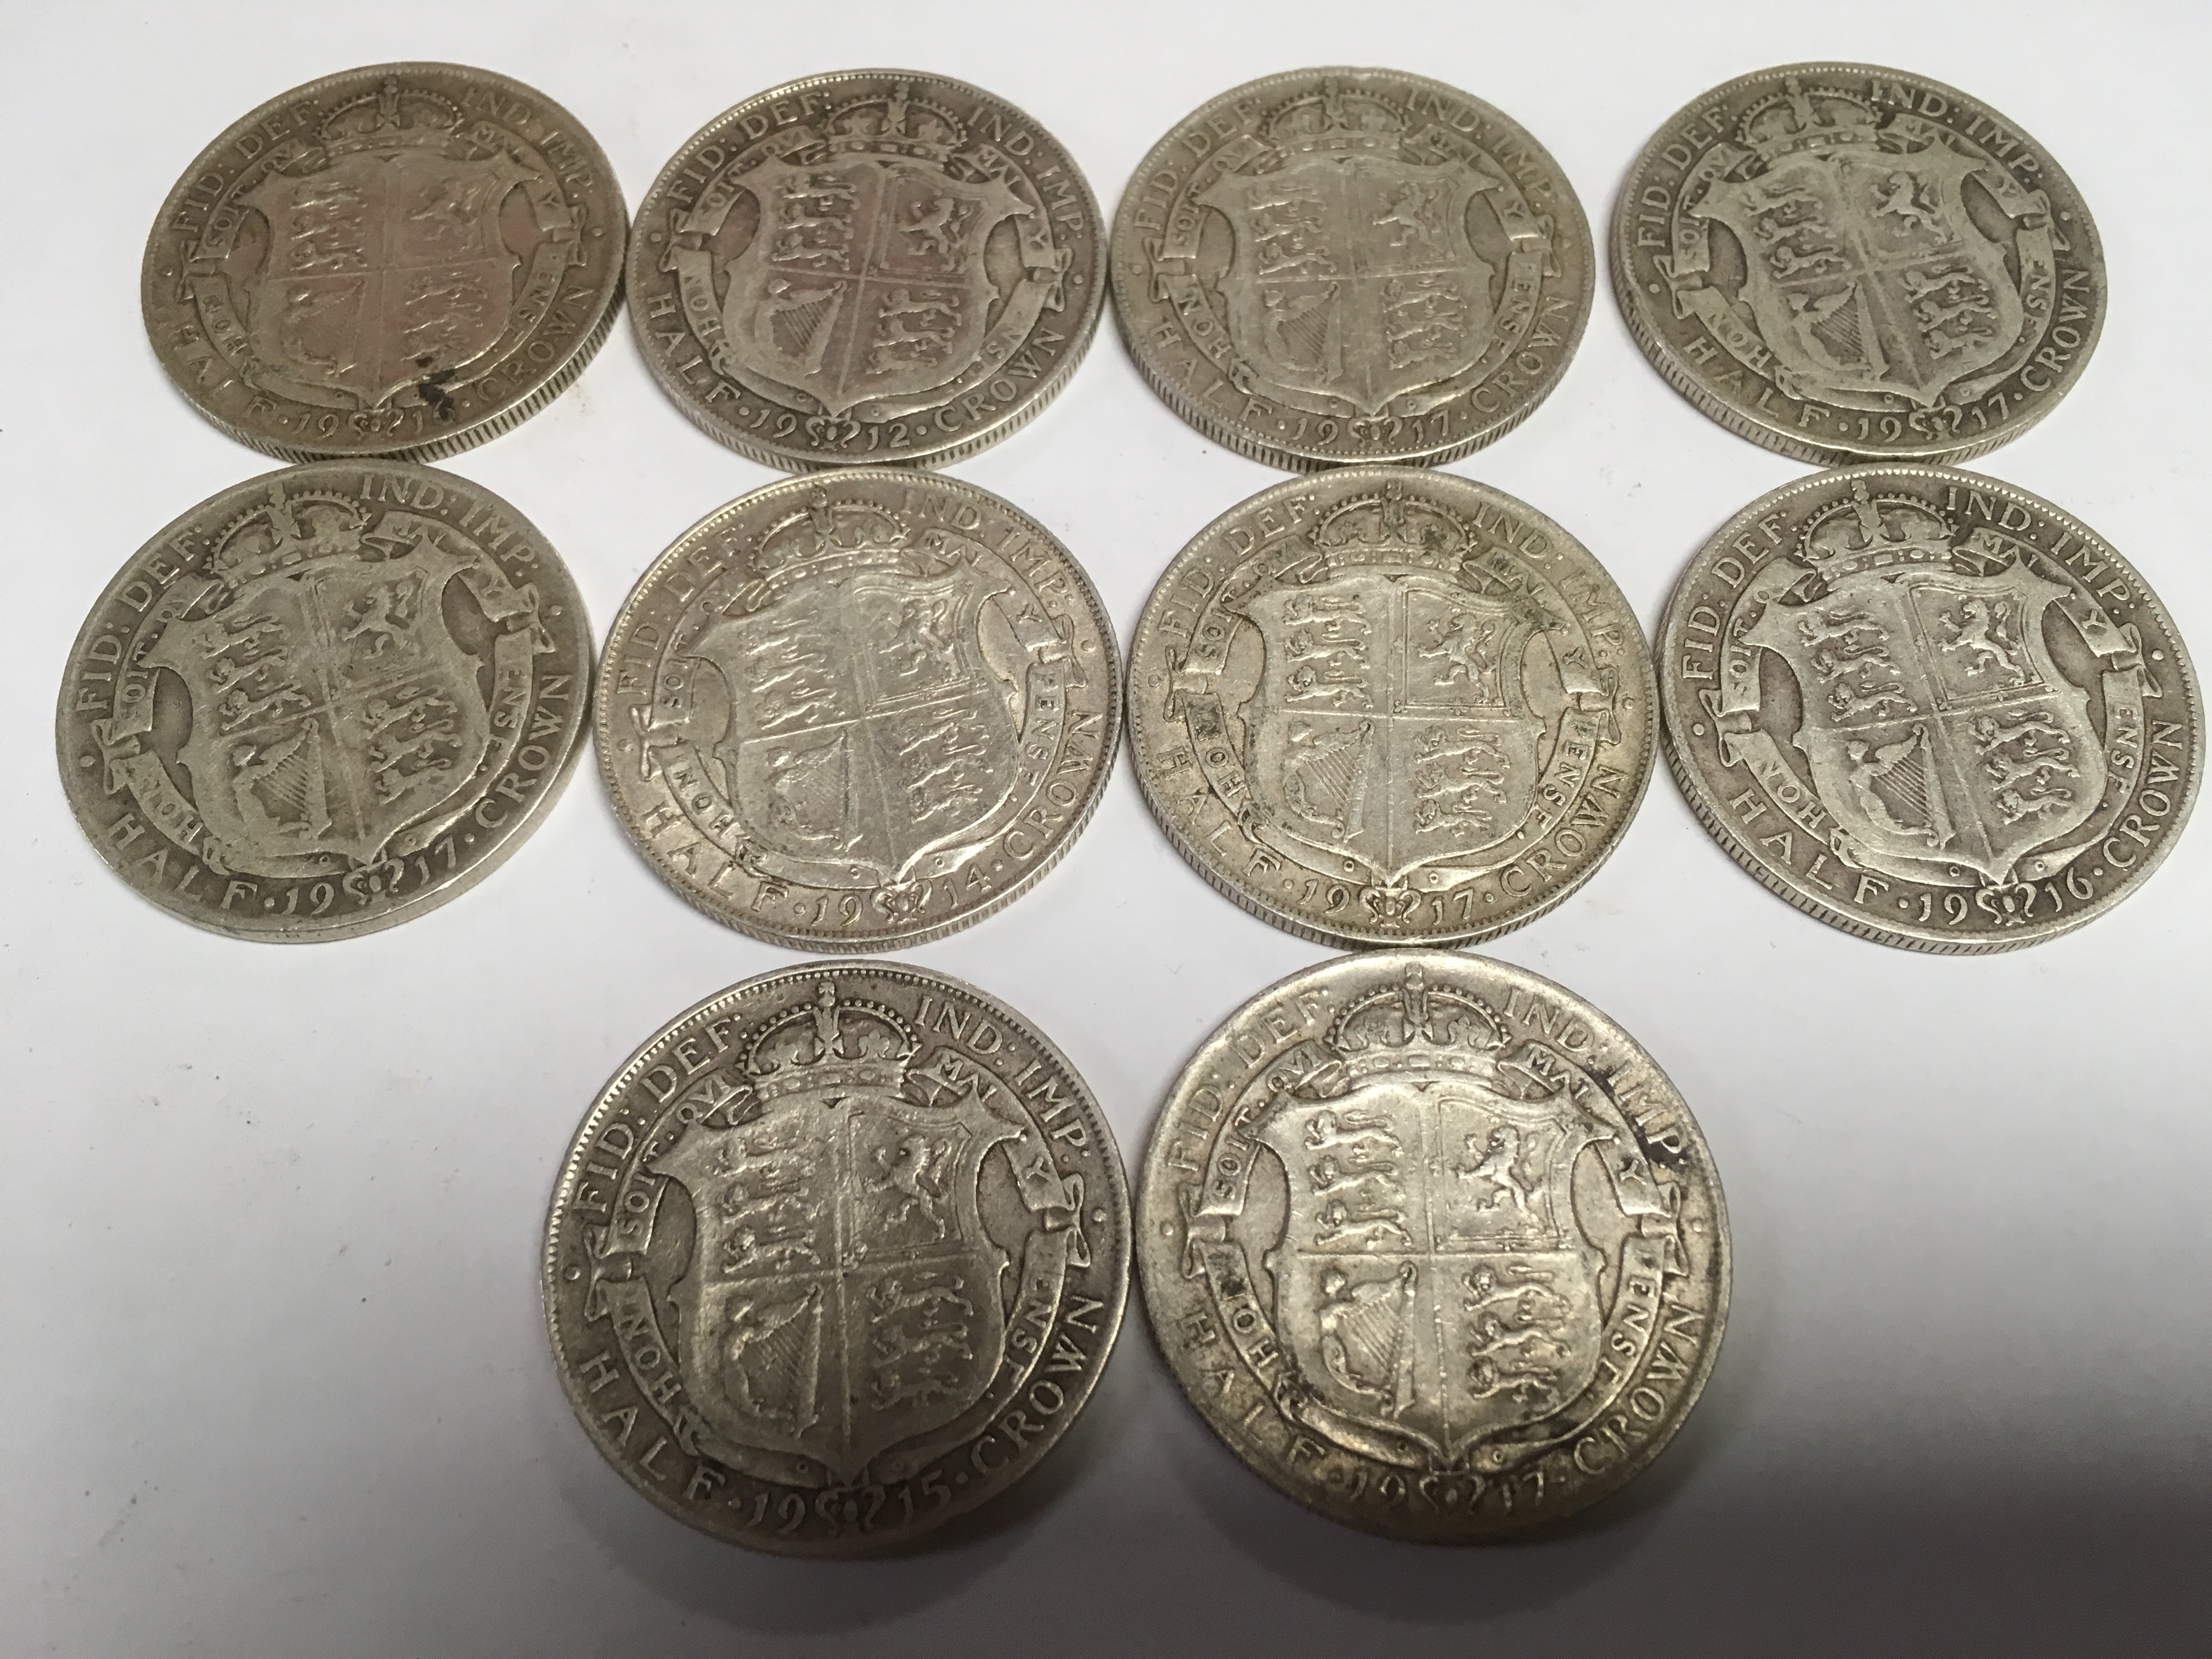 TUB OF PRE 1920 UK SILVER COINS INCLUDING 1903 FLORIN, 1906 SHILLING ETC, FACE APPROX £2.40. - Image 3 of 5